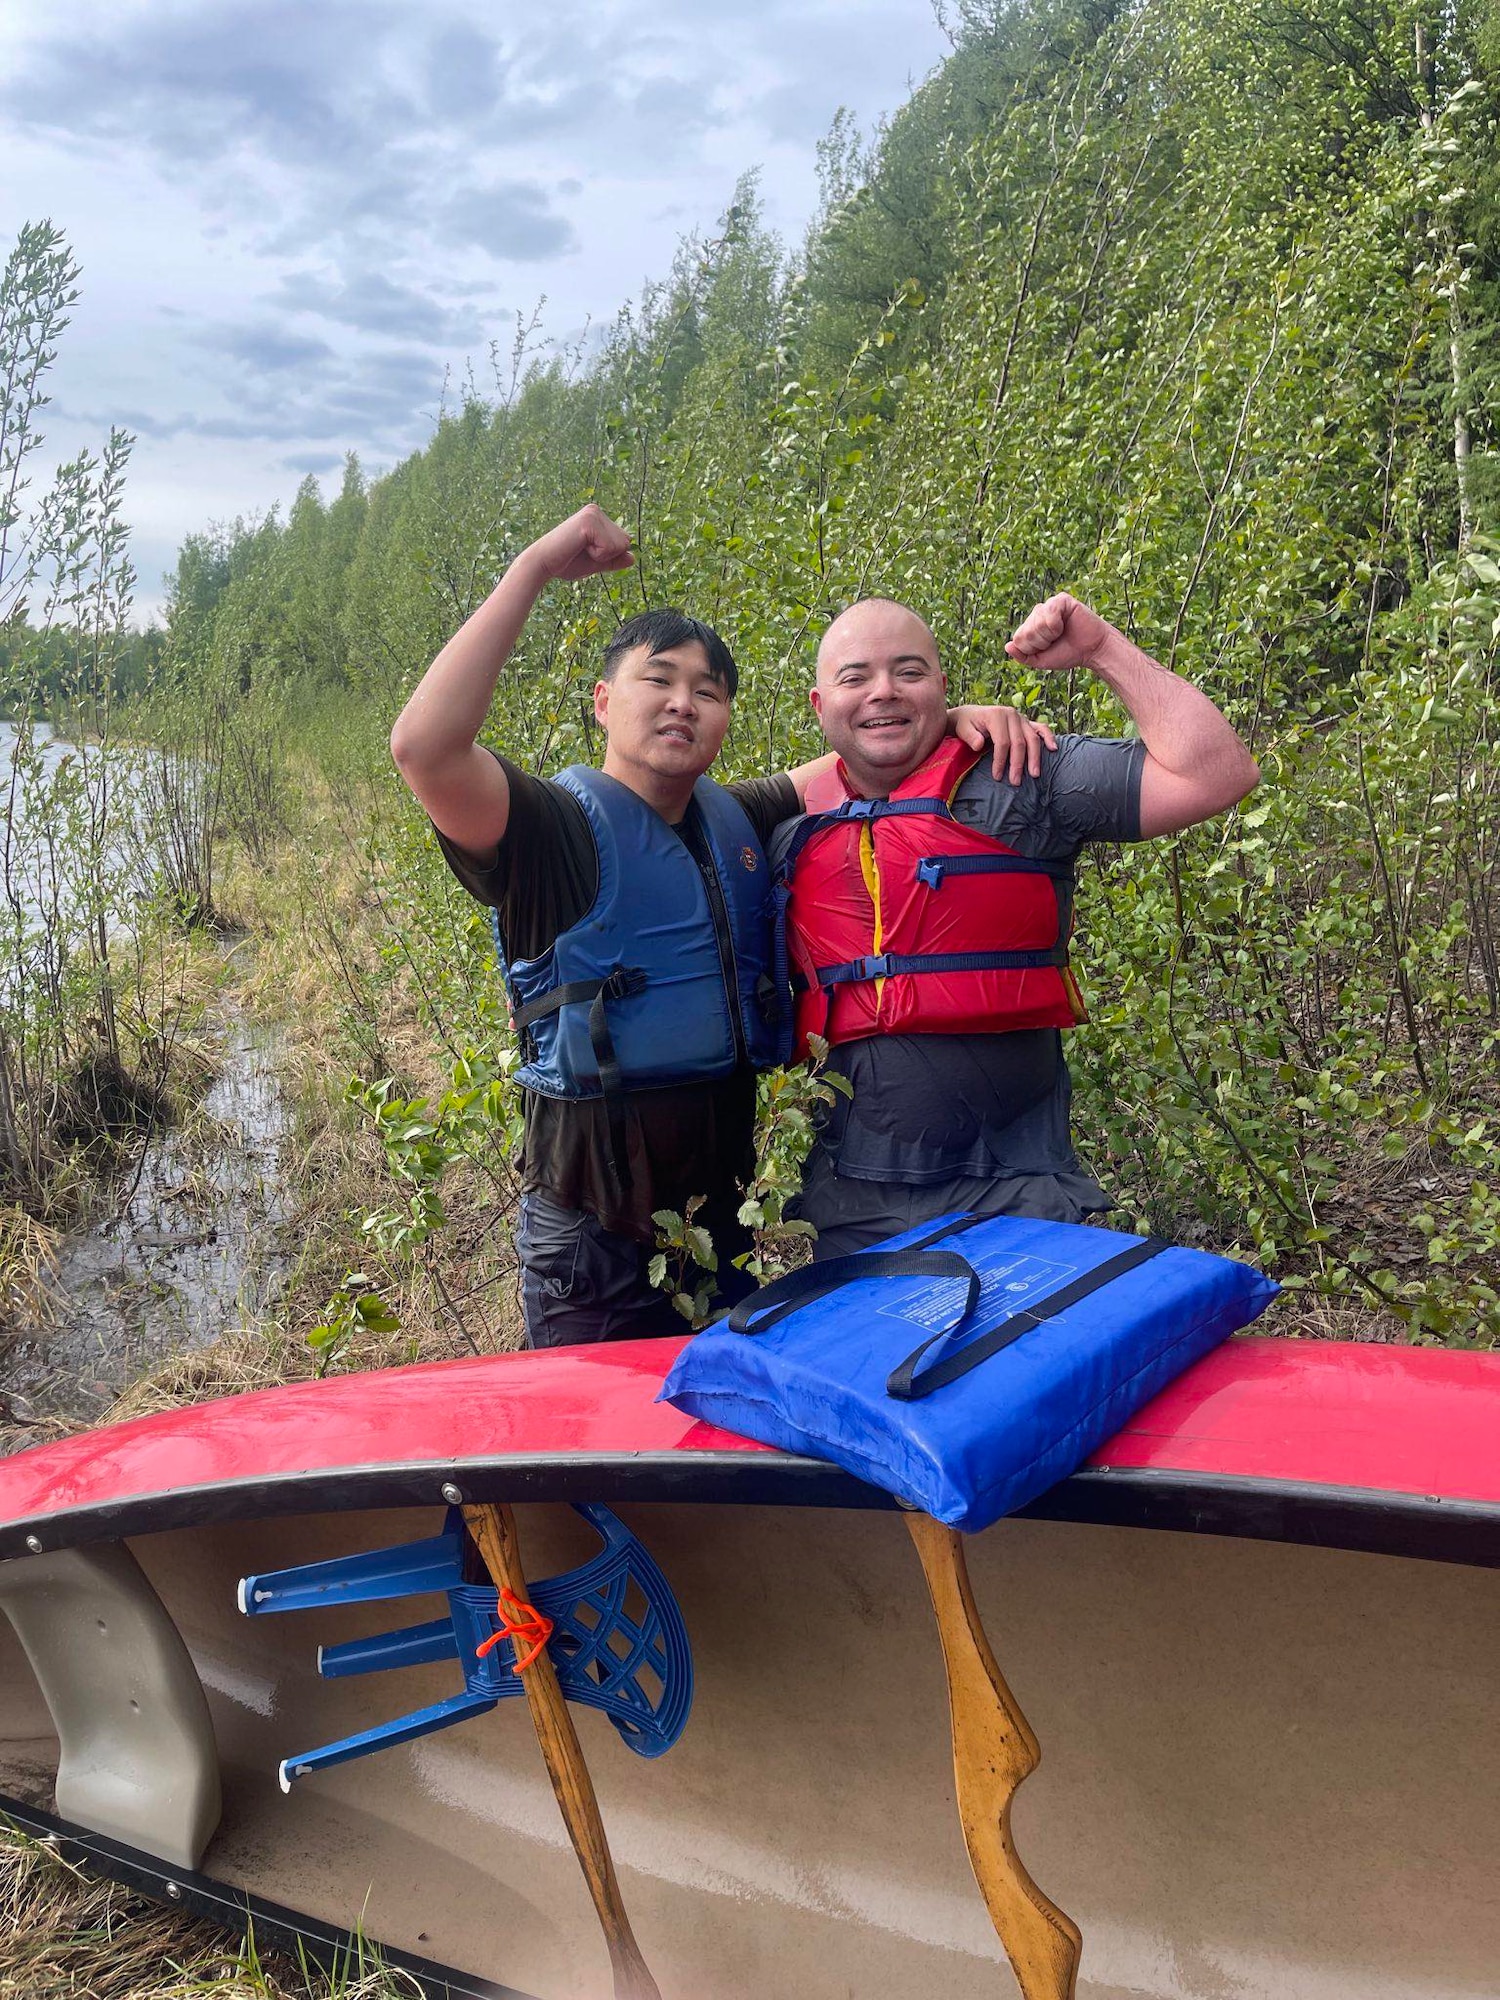 U.S. Air Force Capt. Sung Woo Suh, 80th Fighter Generation Squadron Director of Operations, left,, and Master Sgt.t Carleton Kennedy, 80th FGS production supervisor, pose for a photo at Chena Lake Recreation Area, June 3, 2023. While deployed to Eielson in support of RED FLAG-Alaska, Suh and Kennedy were recognized for saving an infant, father and dog from drowning and hypothermia when their kayak capsized in Chena Lake, Alaska on June 3, 2023. (Courtesy photo)